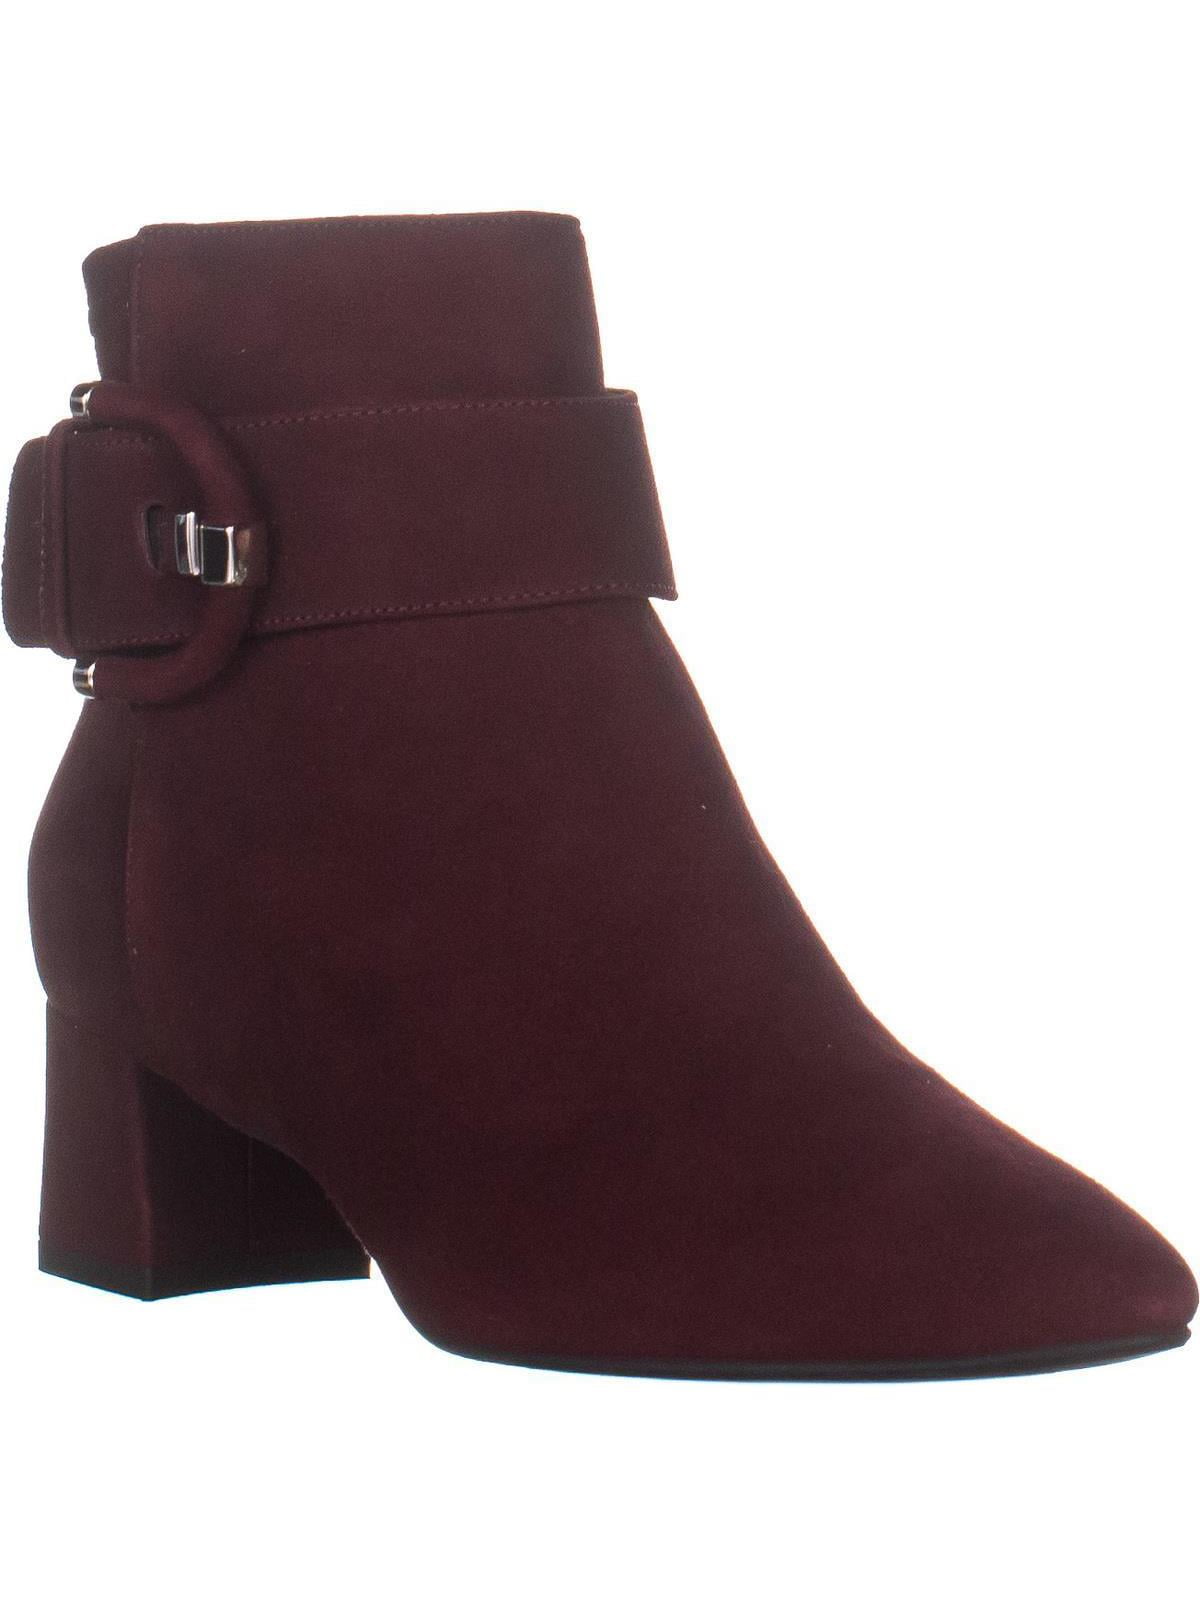 wine colored ankle boots